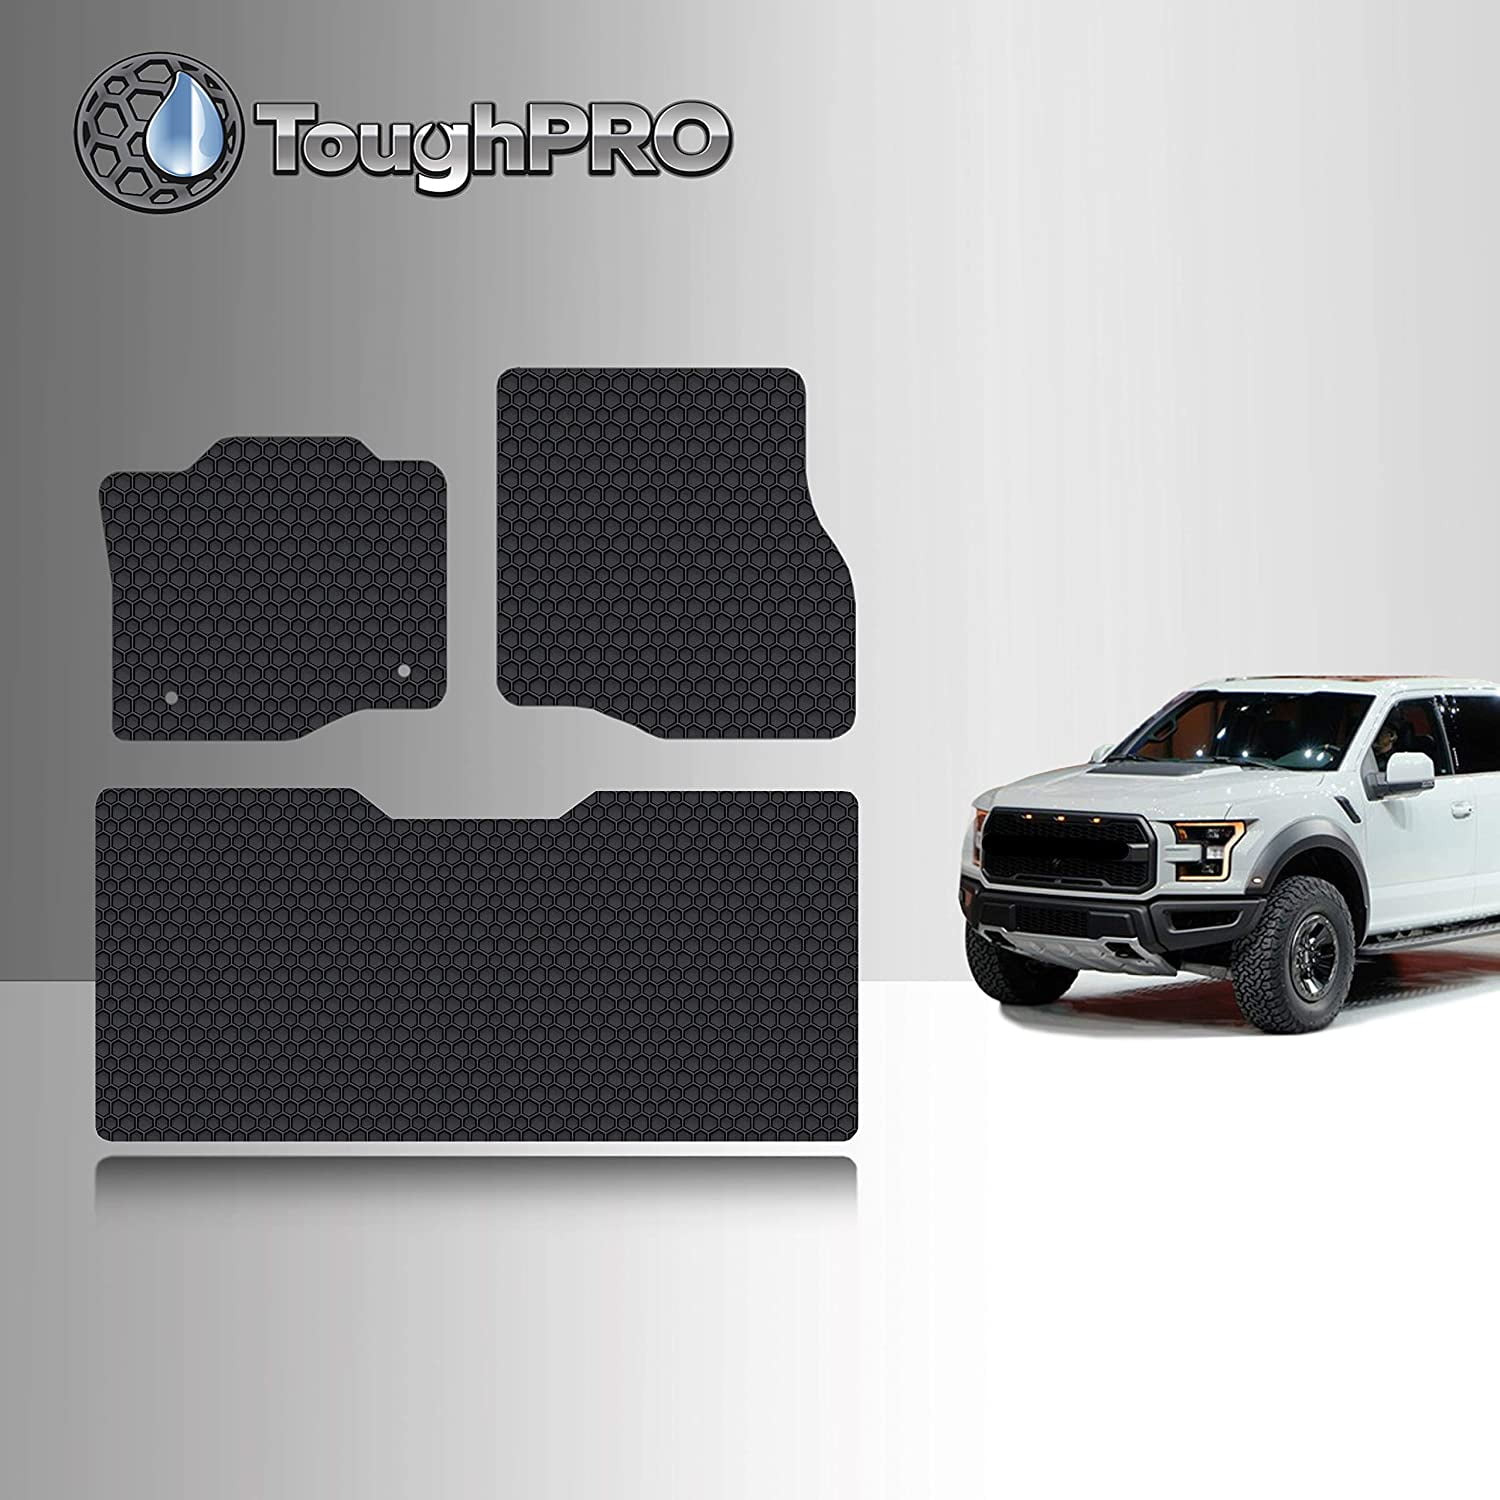 TOUGHPRO Floor Mat Accessories Set (Front Row + 2nd Row